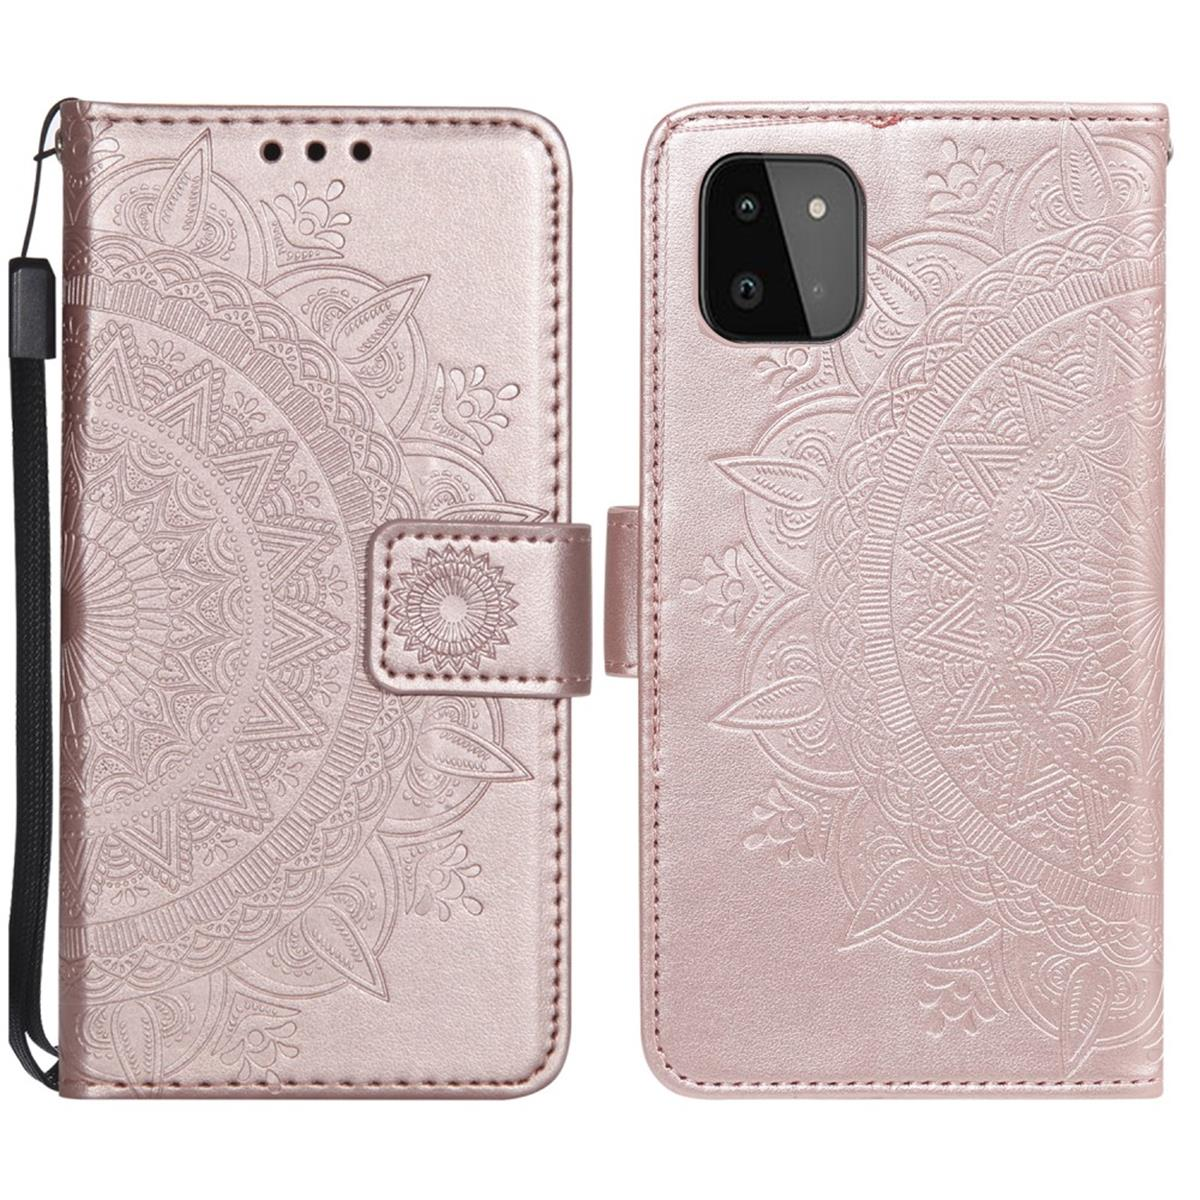 Samsung, COVERKINGZ 5G, Klapphülle Galaxy Mandala mit Muster, Bookcover, A22 Roségold